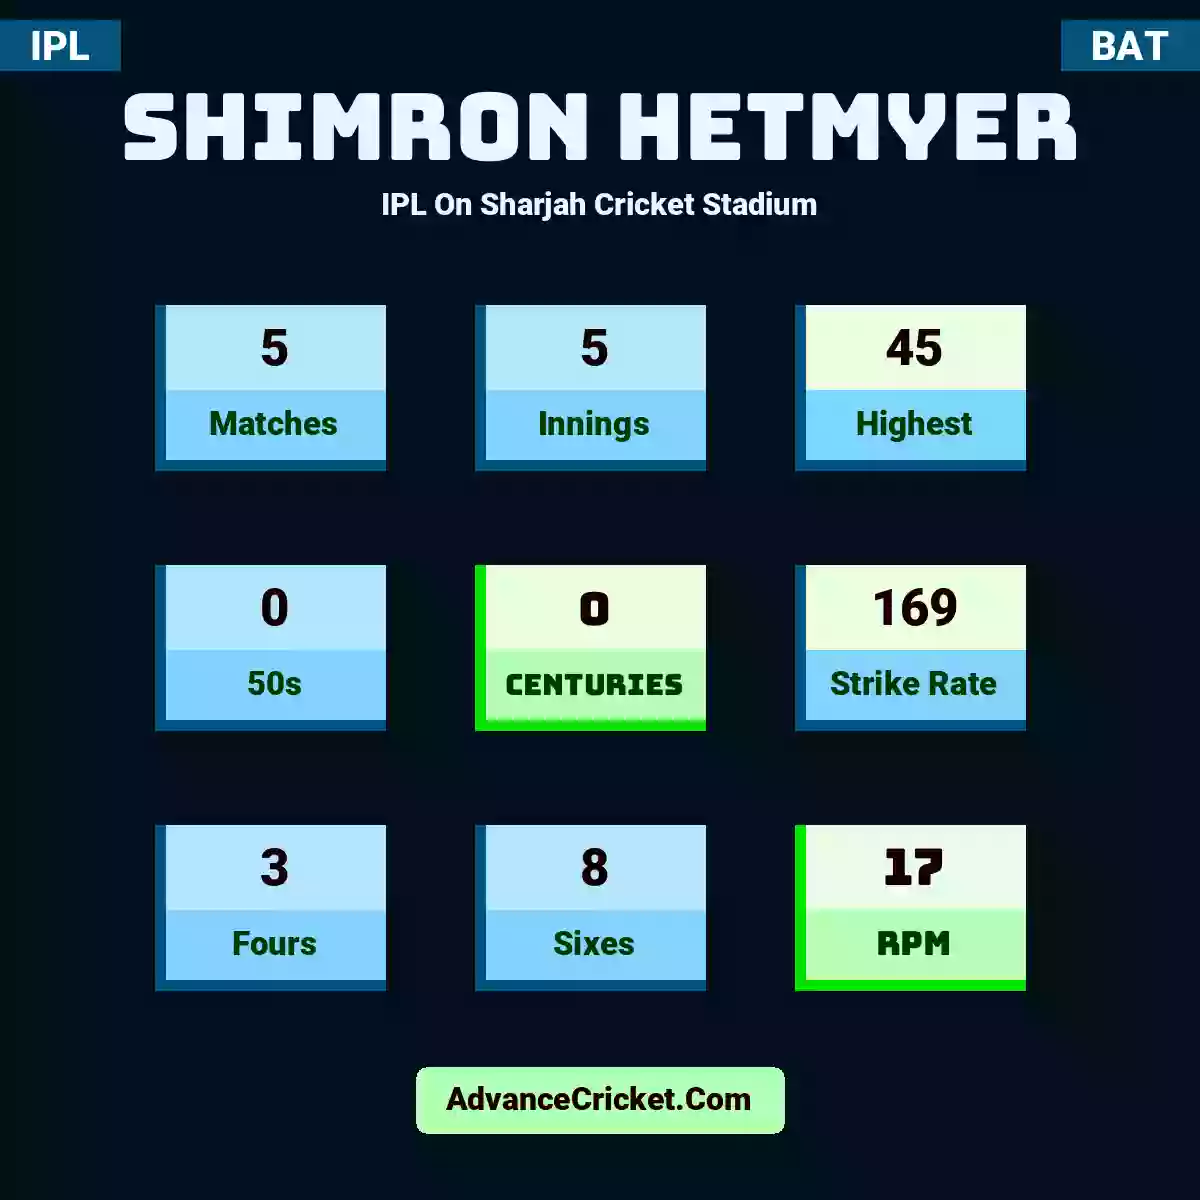 Shimron Hetmyer IPL  On Sharjah Cricket Stadium, Shimron Hetmyer played 5 matches, scored 45 runs as highest, 0 half-centuries, and 0 centuries, with a strike rate of 169. S.Hetmyer hit 3 fours and 8 sixes, with an RPM of 17.